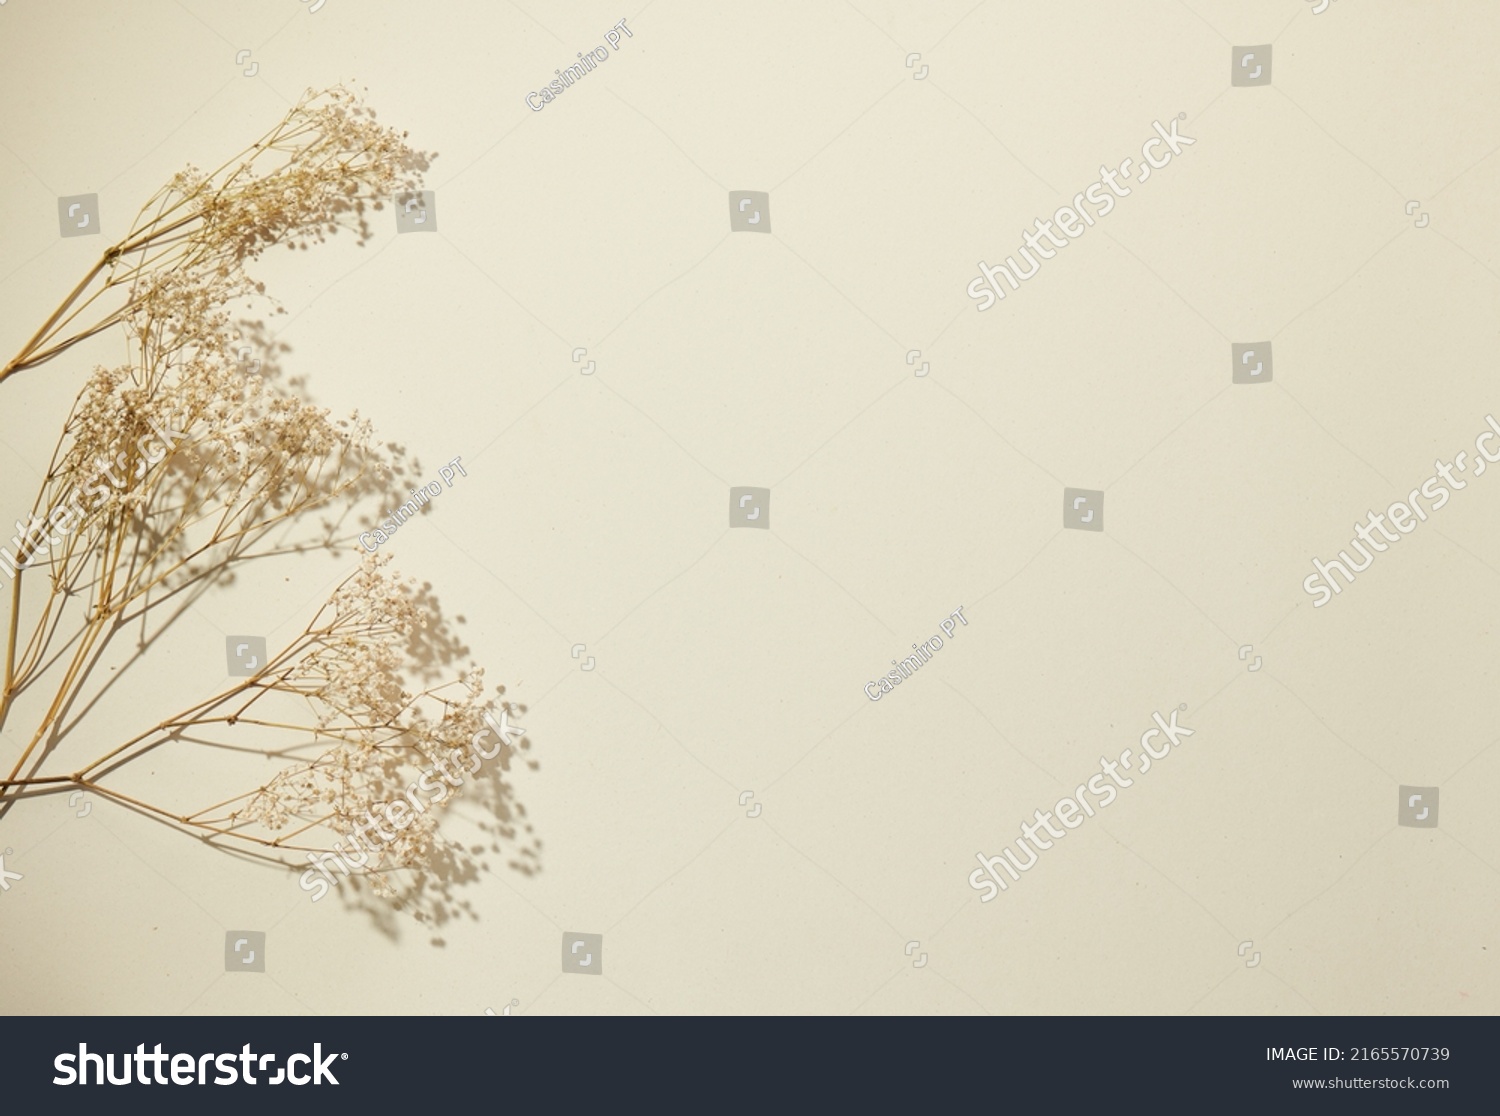 Flatlay minimal natural beige background with empty space. Template for branding and product presentation. Still life photo, table dry plants #2165570739